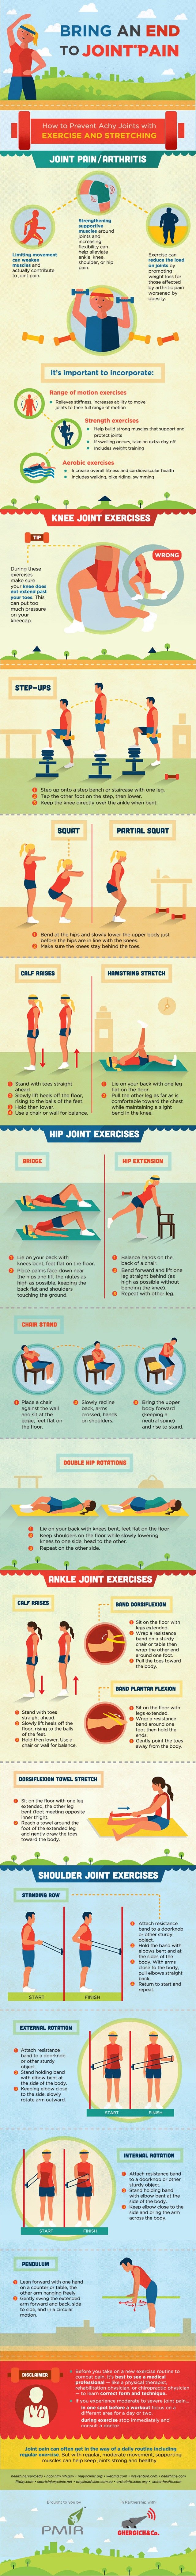 Joint Pain Infographic